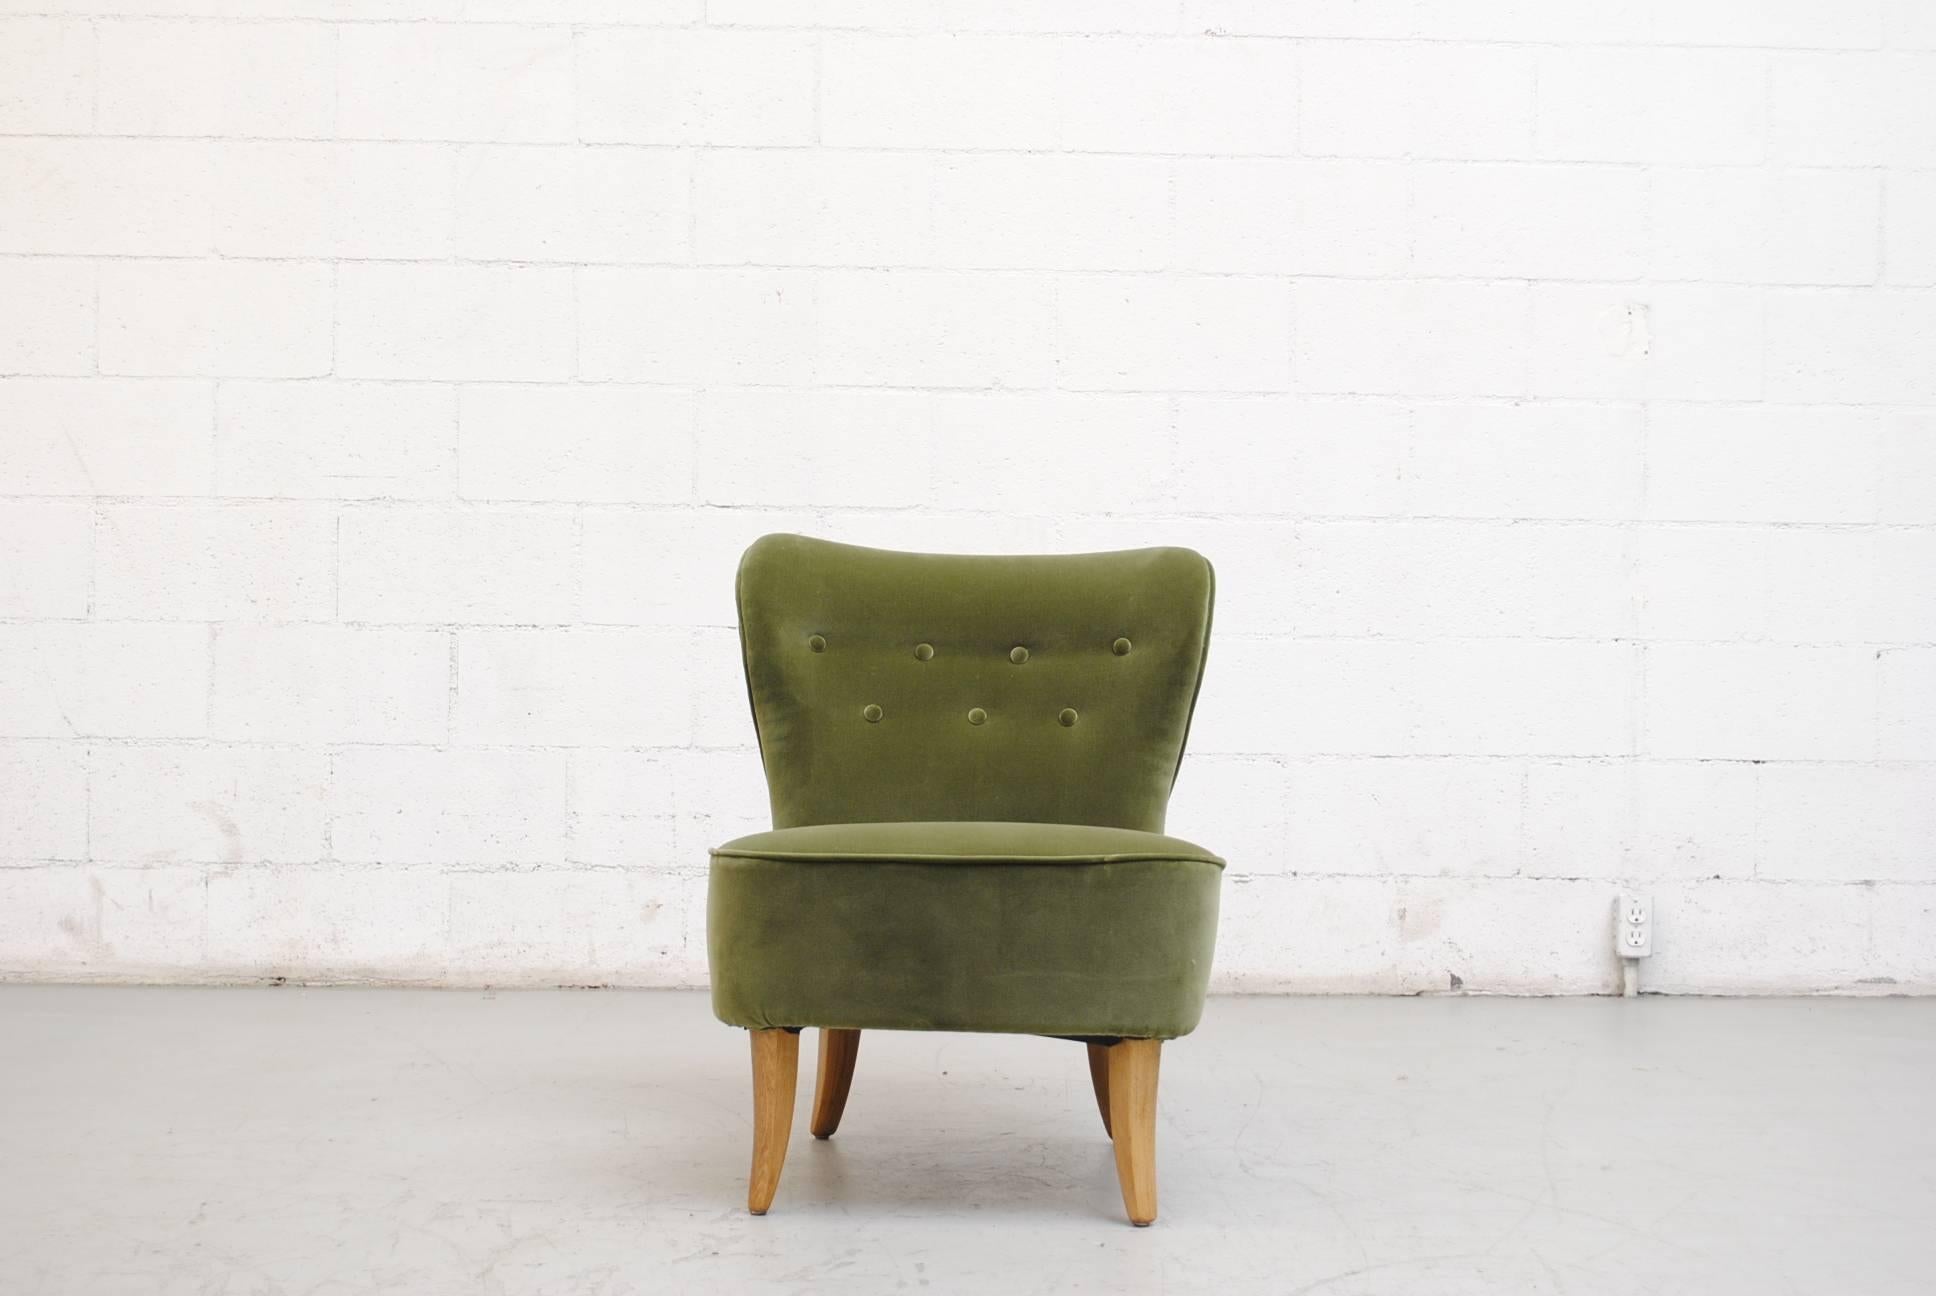 Wonderful Olive Green Velvet Theo Ruth Armless Lounge Chair with Natural Wood Legs. Newly upholstered with lightly refinished legs. Similar Lounge Chairs available and listed separately.